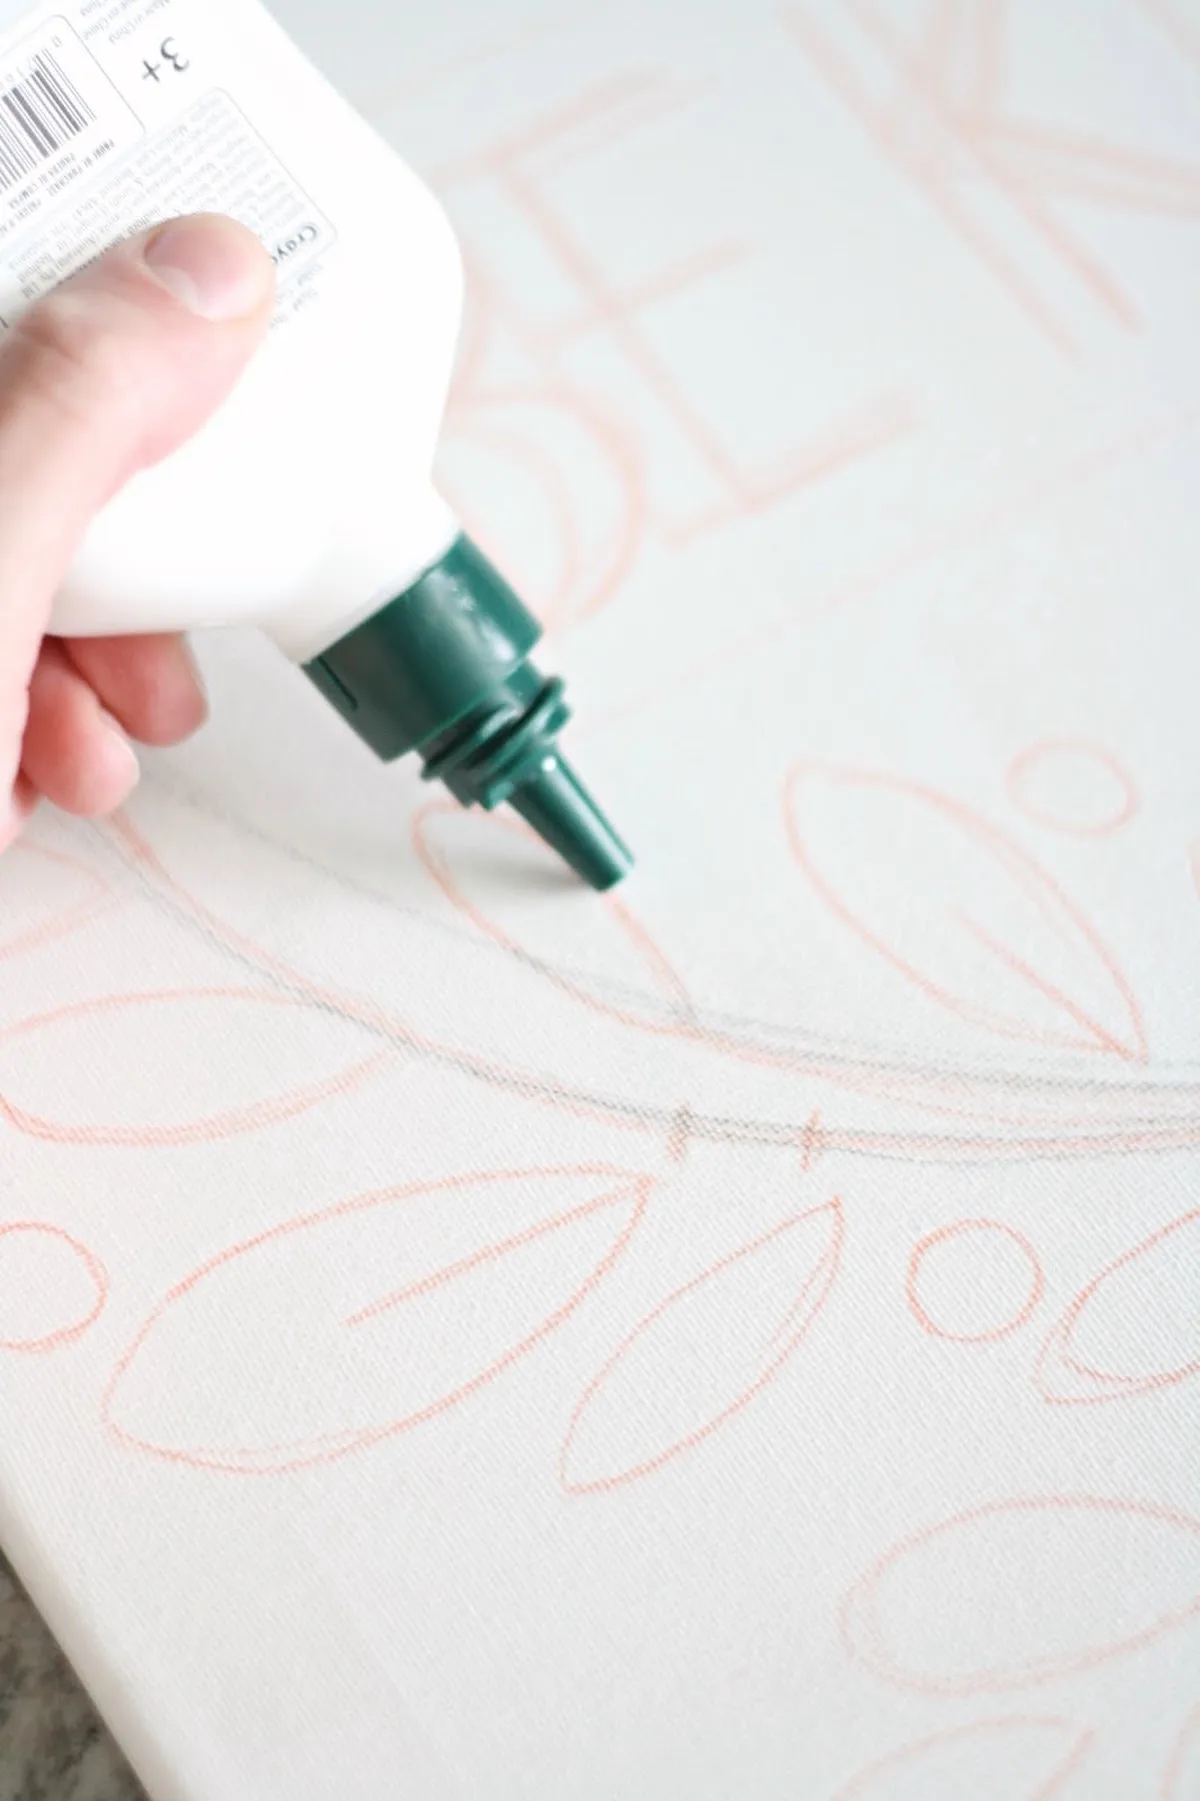 Tracing the pencil lines with washable glue